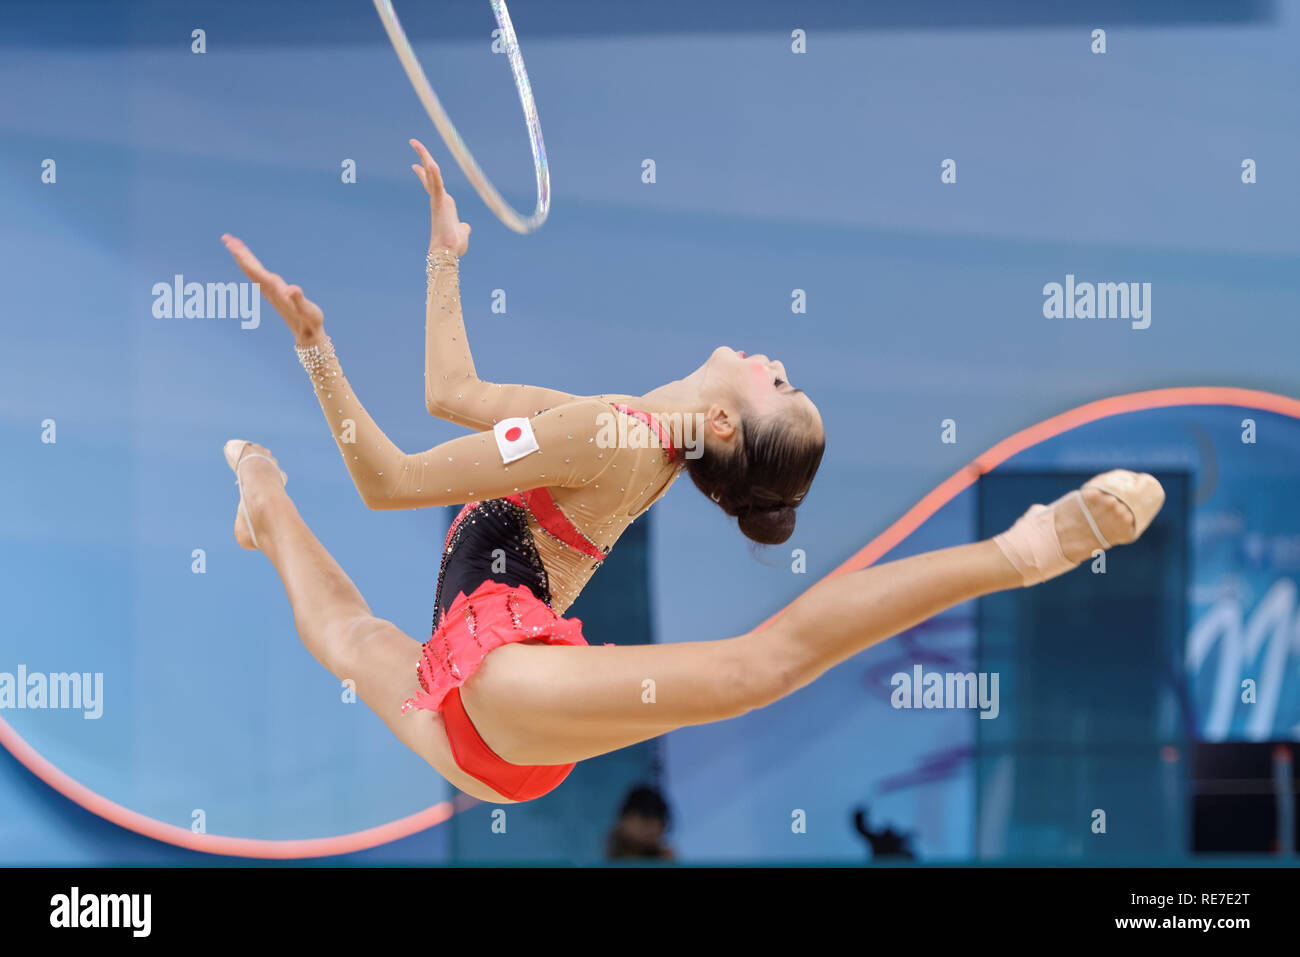 Kiev, Ukraine - August 28, 2013: Kaho Minagawa, Japan performs with hoop during 32nd Rhythmic Gymnastics World Championships. The event is held in Pal Stock Photo